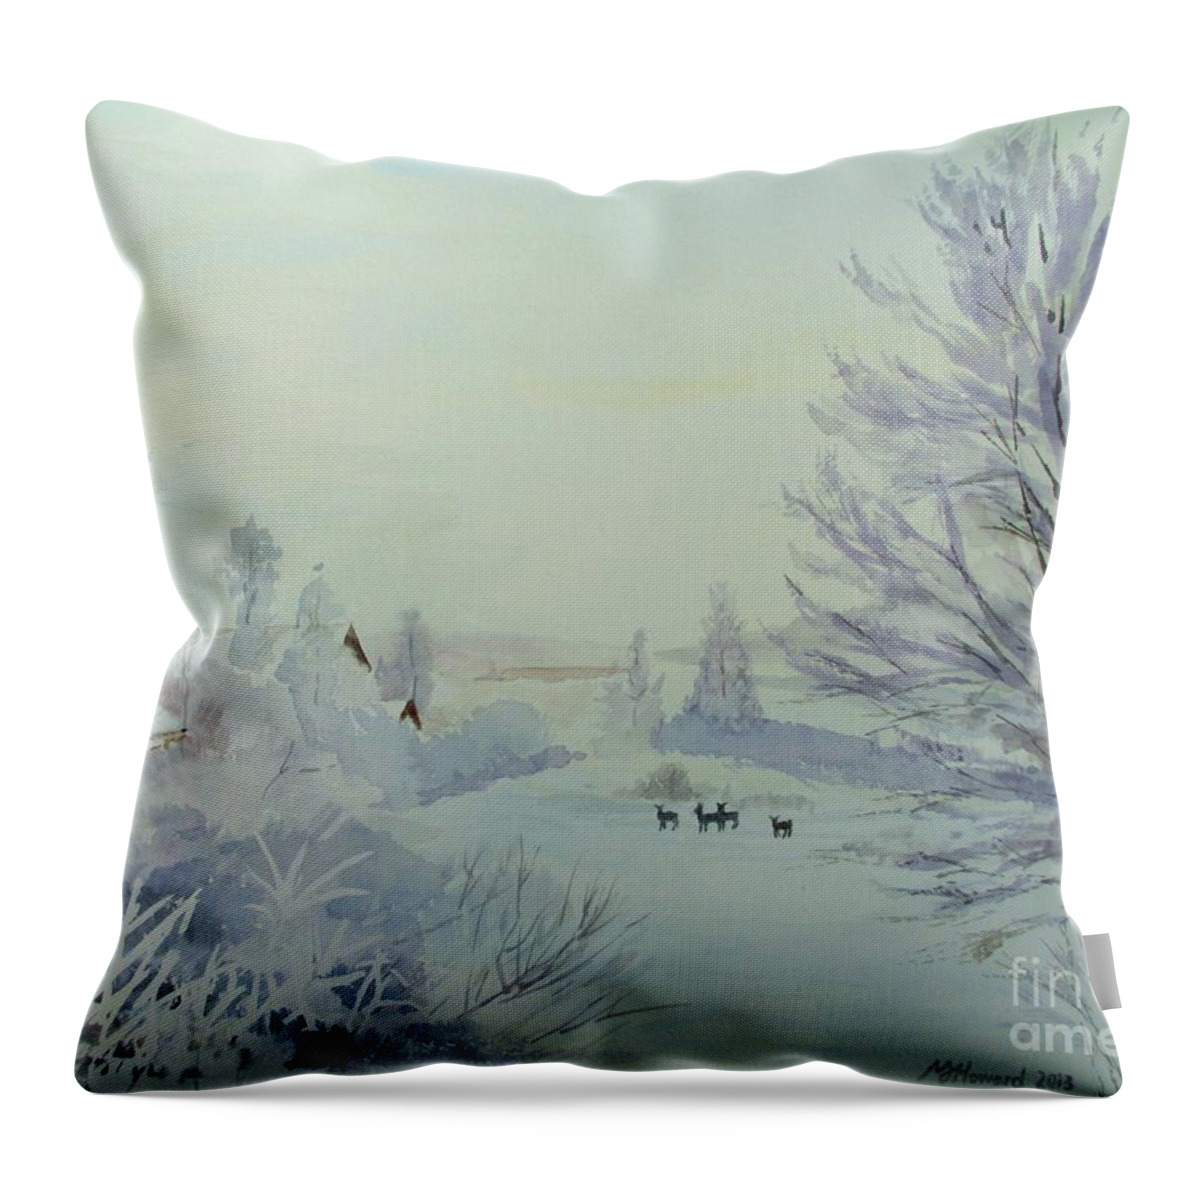 Winter Visitors Throw Pillow featuring the painting Winter Visitors by Martin Howard